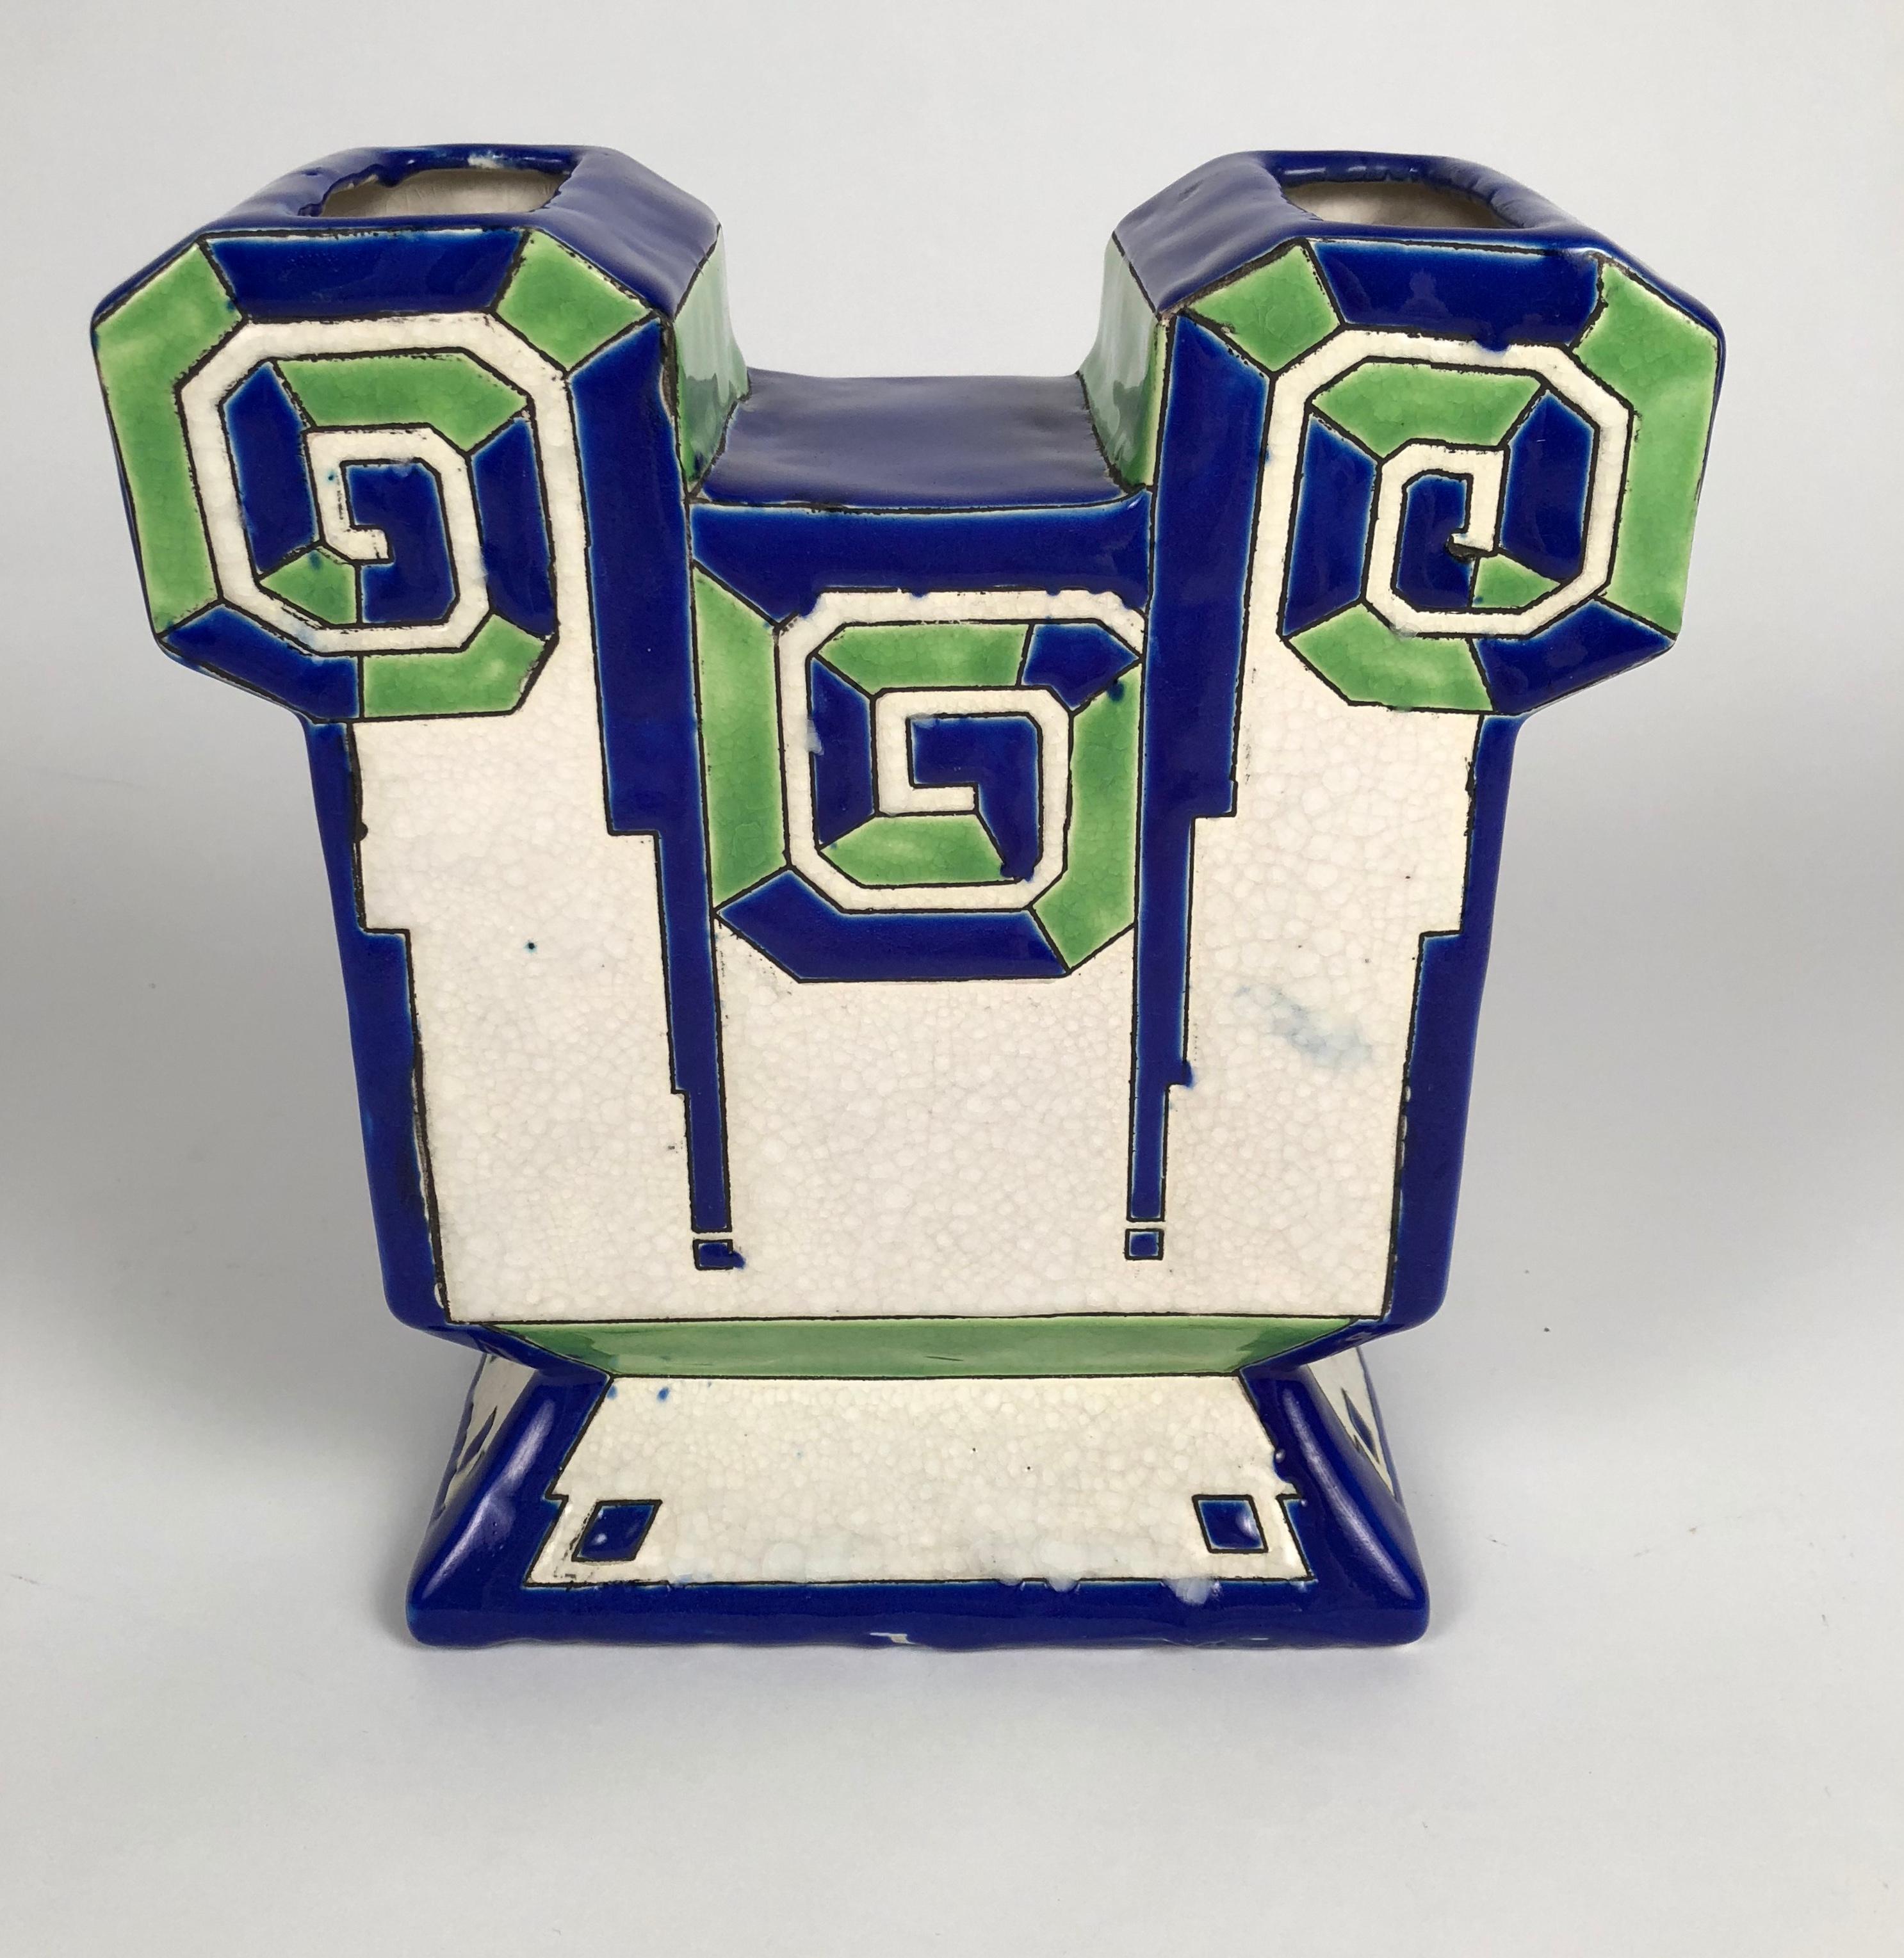 A Boch Frere Kermis Art Deco period blue and green ceramic vase, Belgian, circa 1930, of geometric form decorated with blue and green enamels, outlined in black on white, with a craquelure glazed field. Signed and numbered on the base.
This bold,